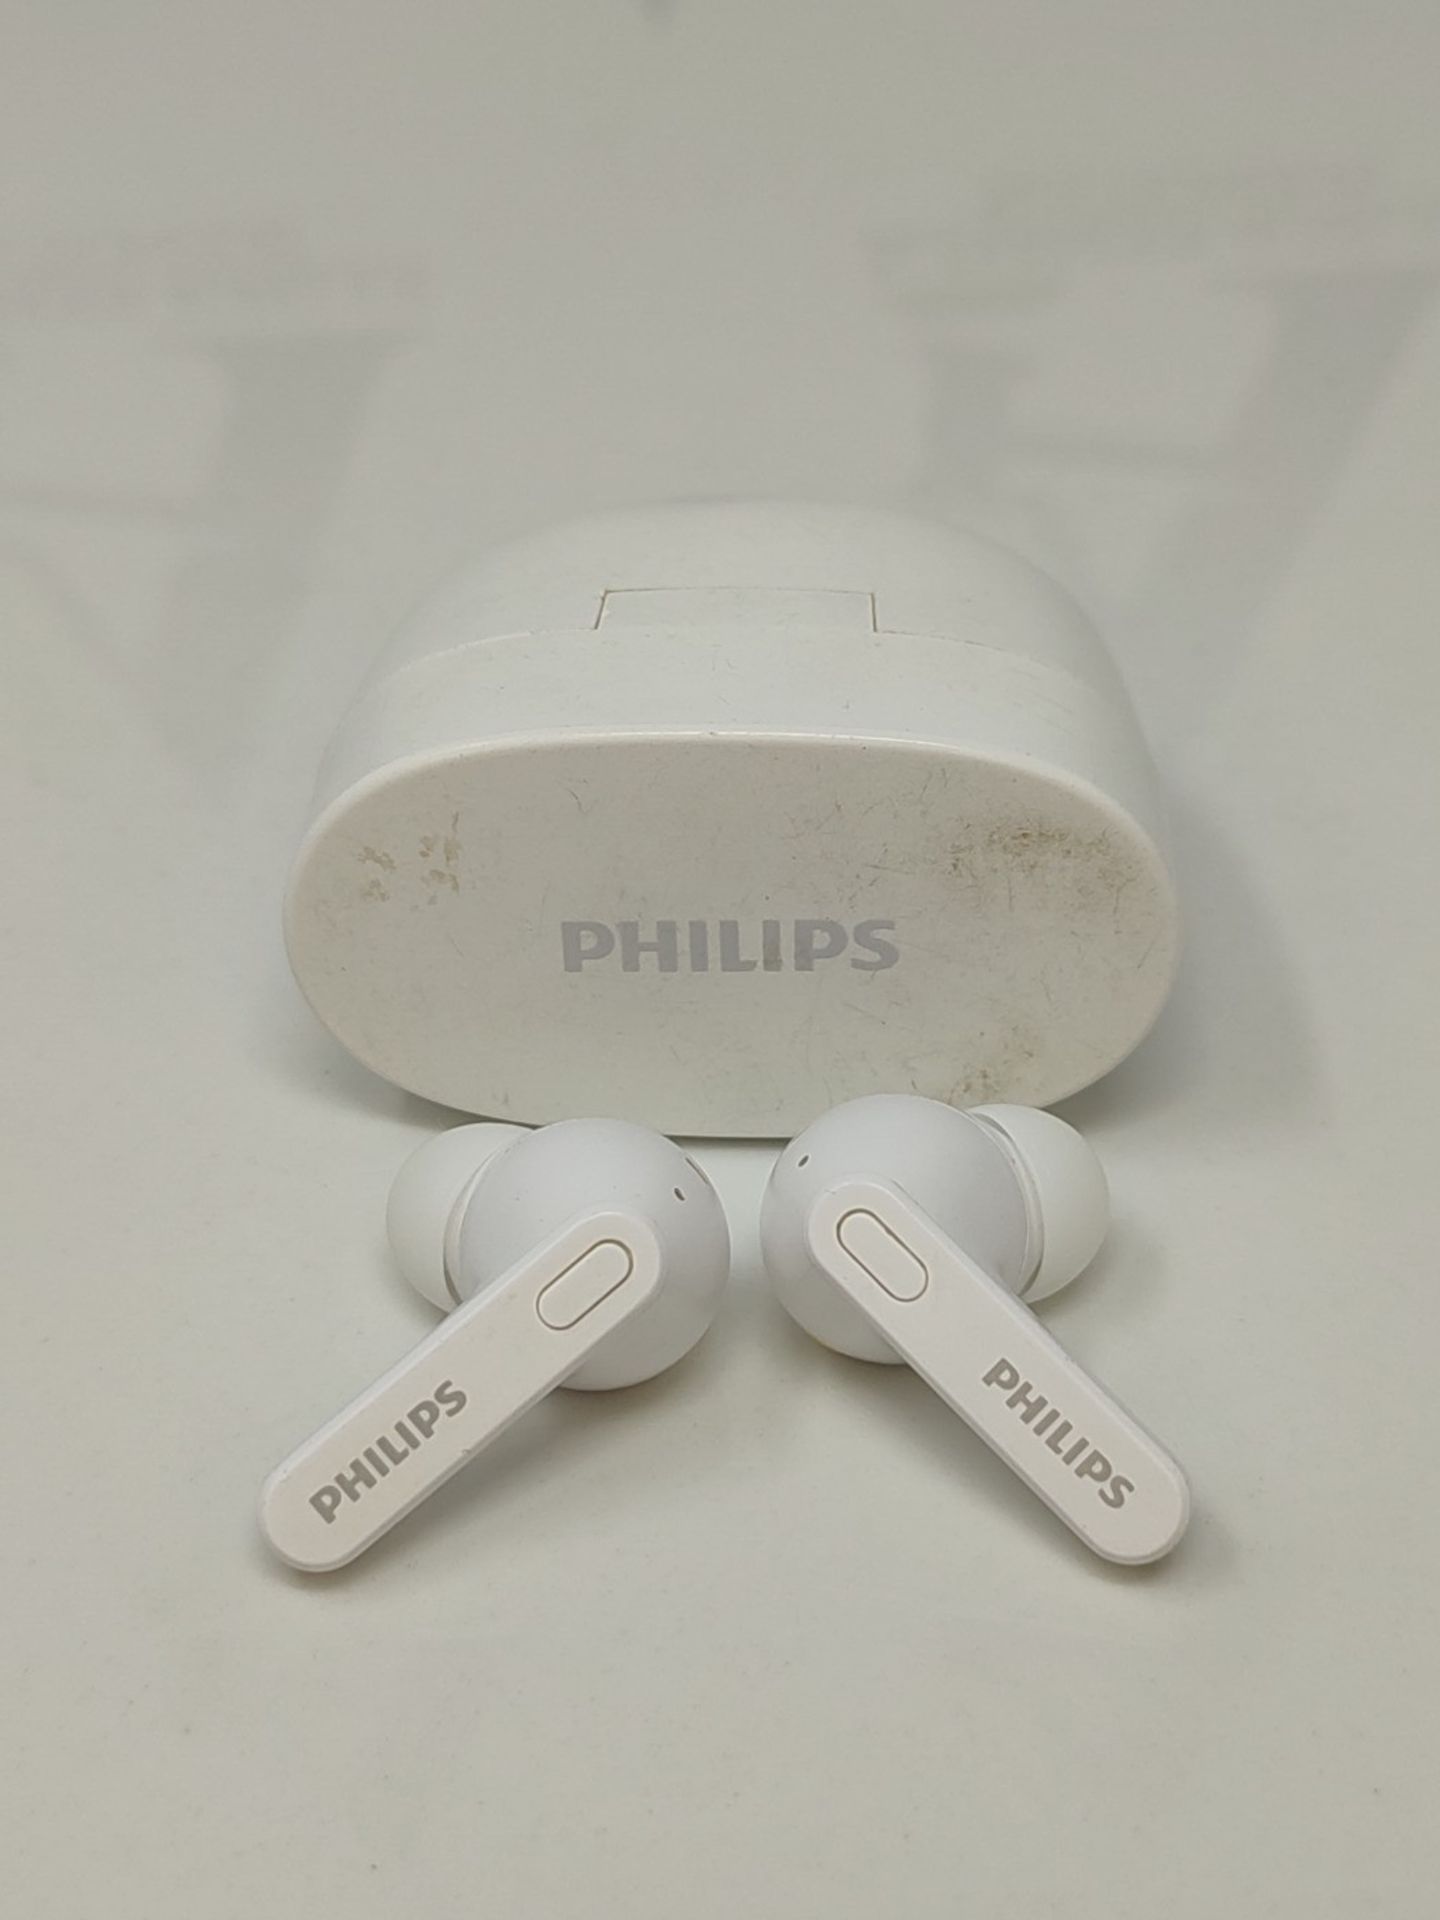 PHILIPS Bluetooth Earphones with Wireless Microphone, Sweat-Resistant, 18 Hours of Pla - Image 6 of 6